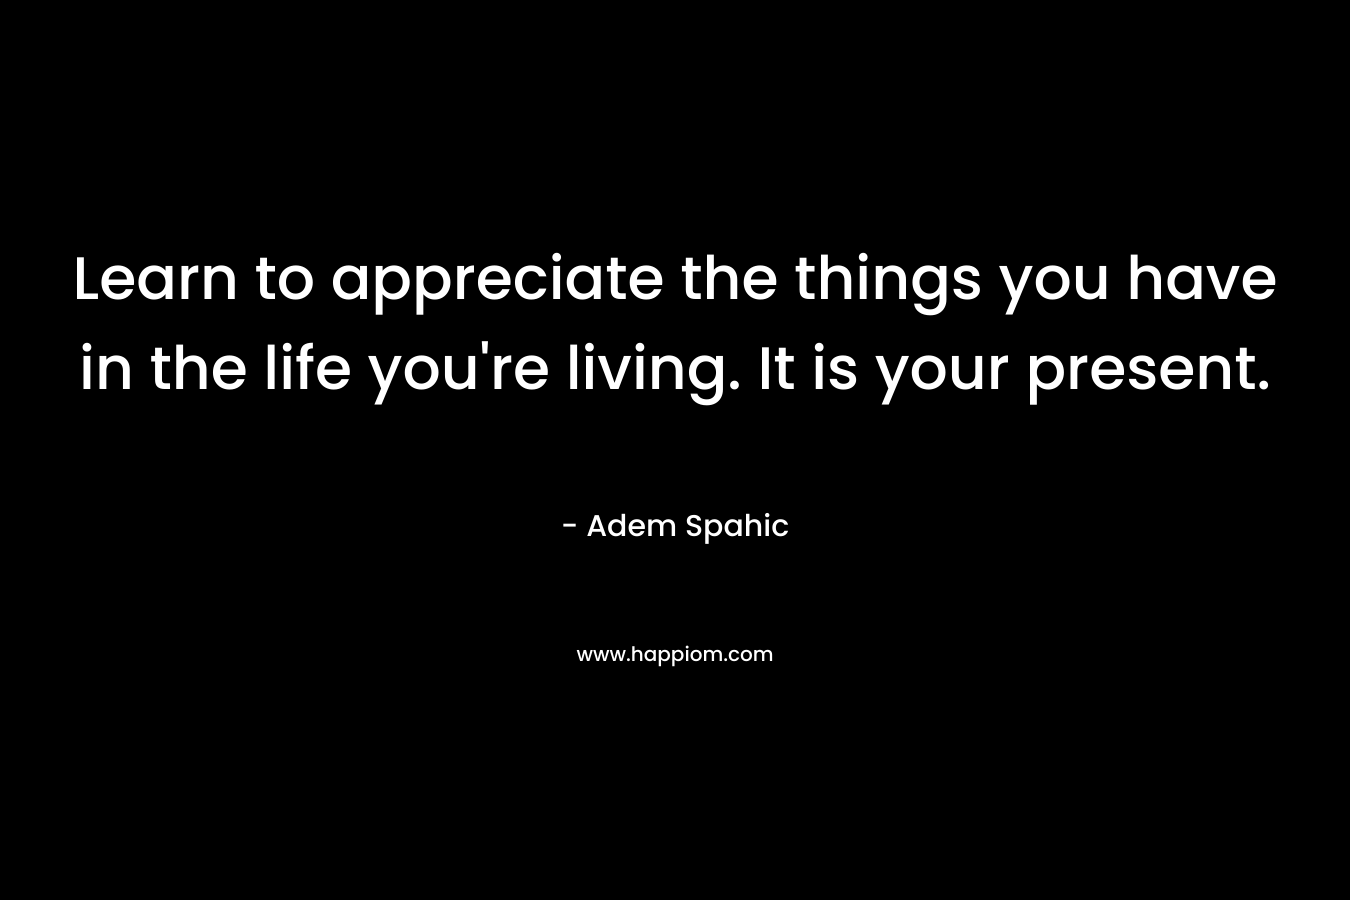 Learn to appreciate the things you have in the life you're living. It is your present.